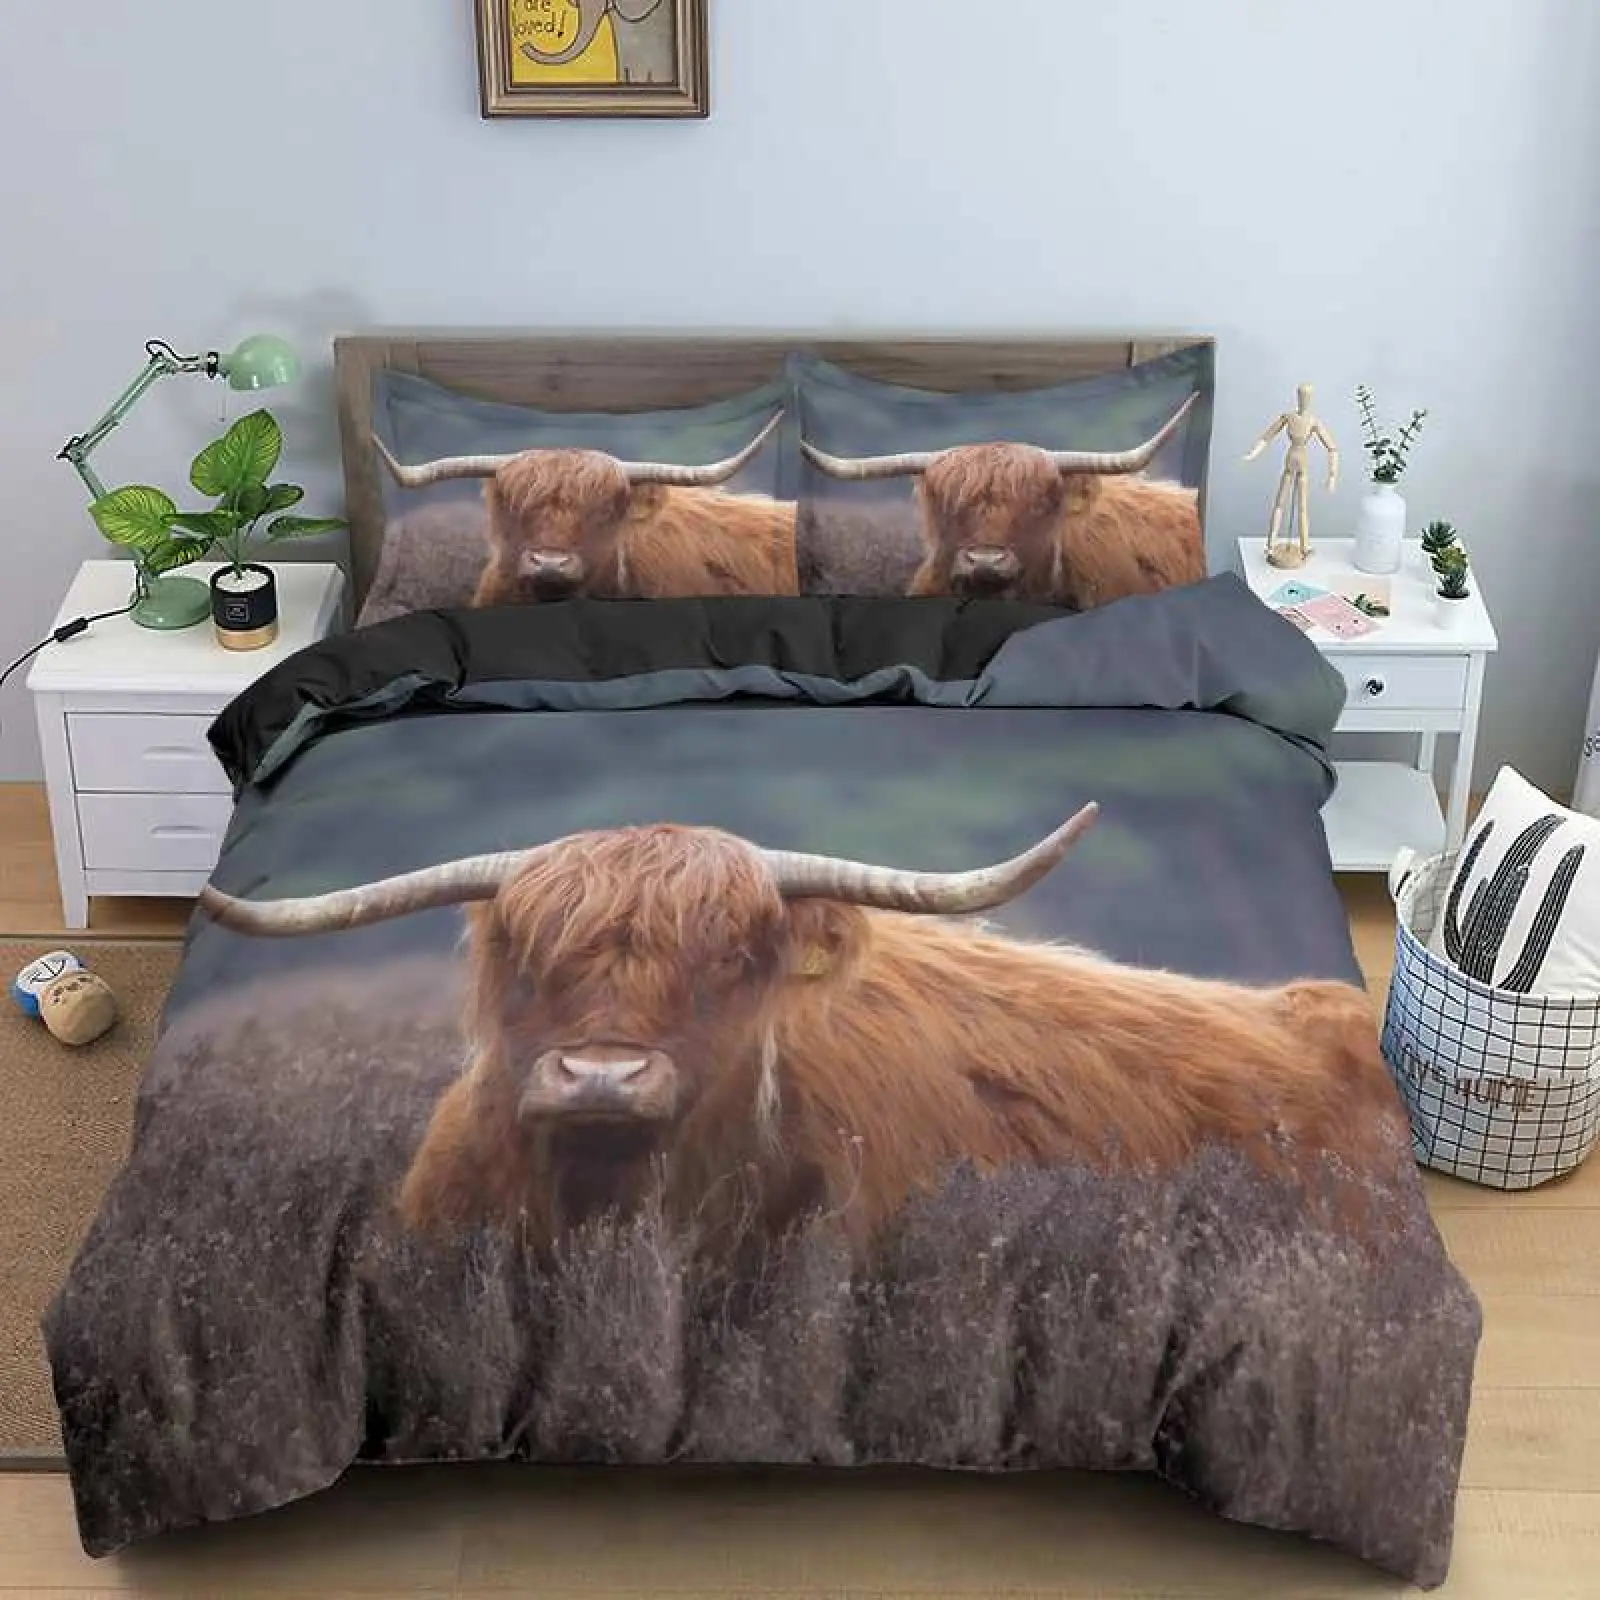 Highland Cow King Queen Duvet Cover Bull Bedding Set for Adults Cattle 2/3pcs Quilt Cover Farm Animal Polyester Comforter Cover